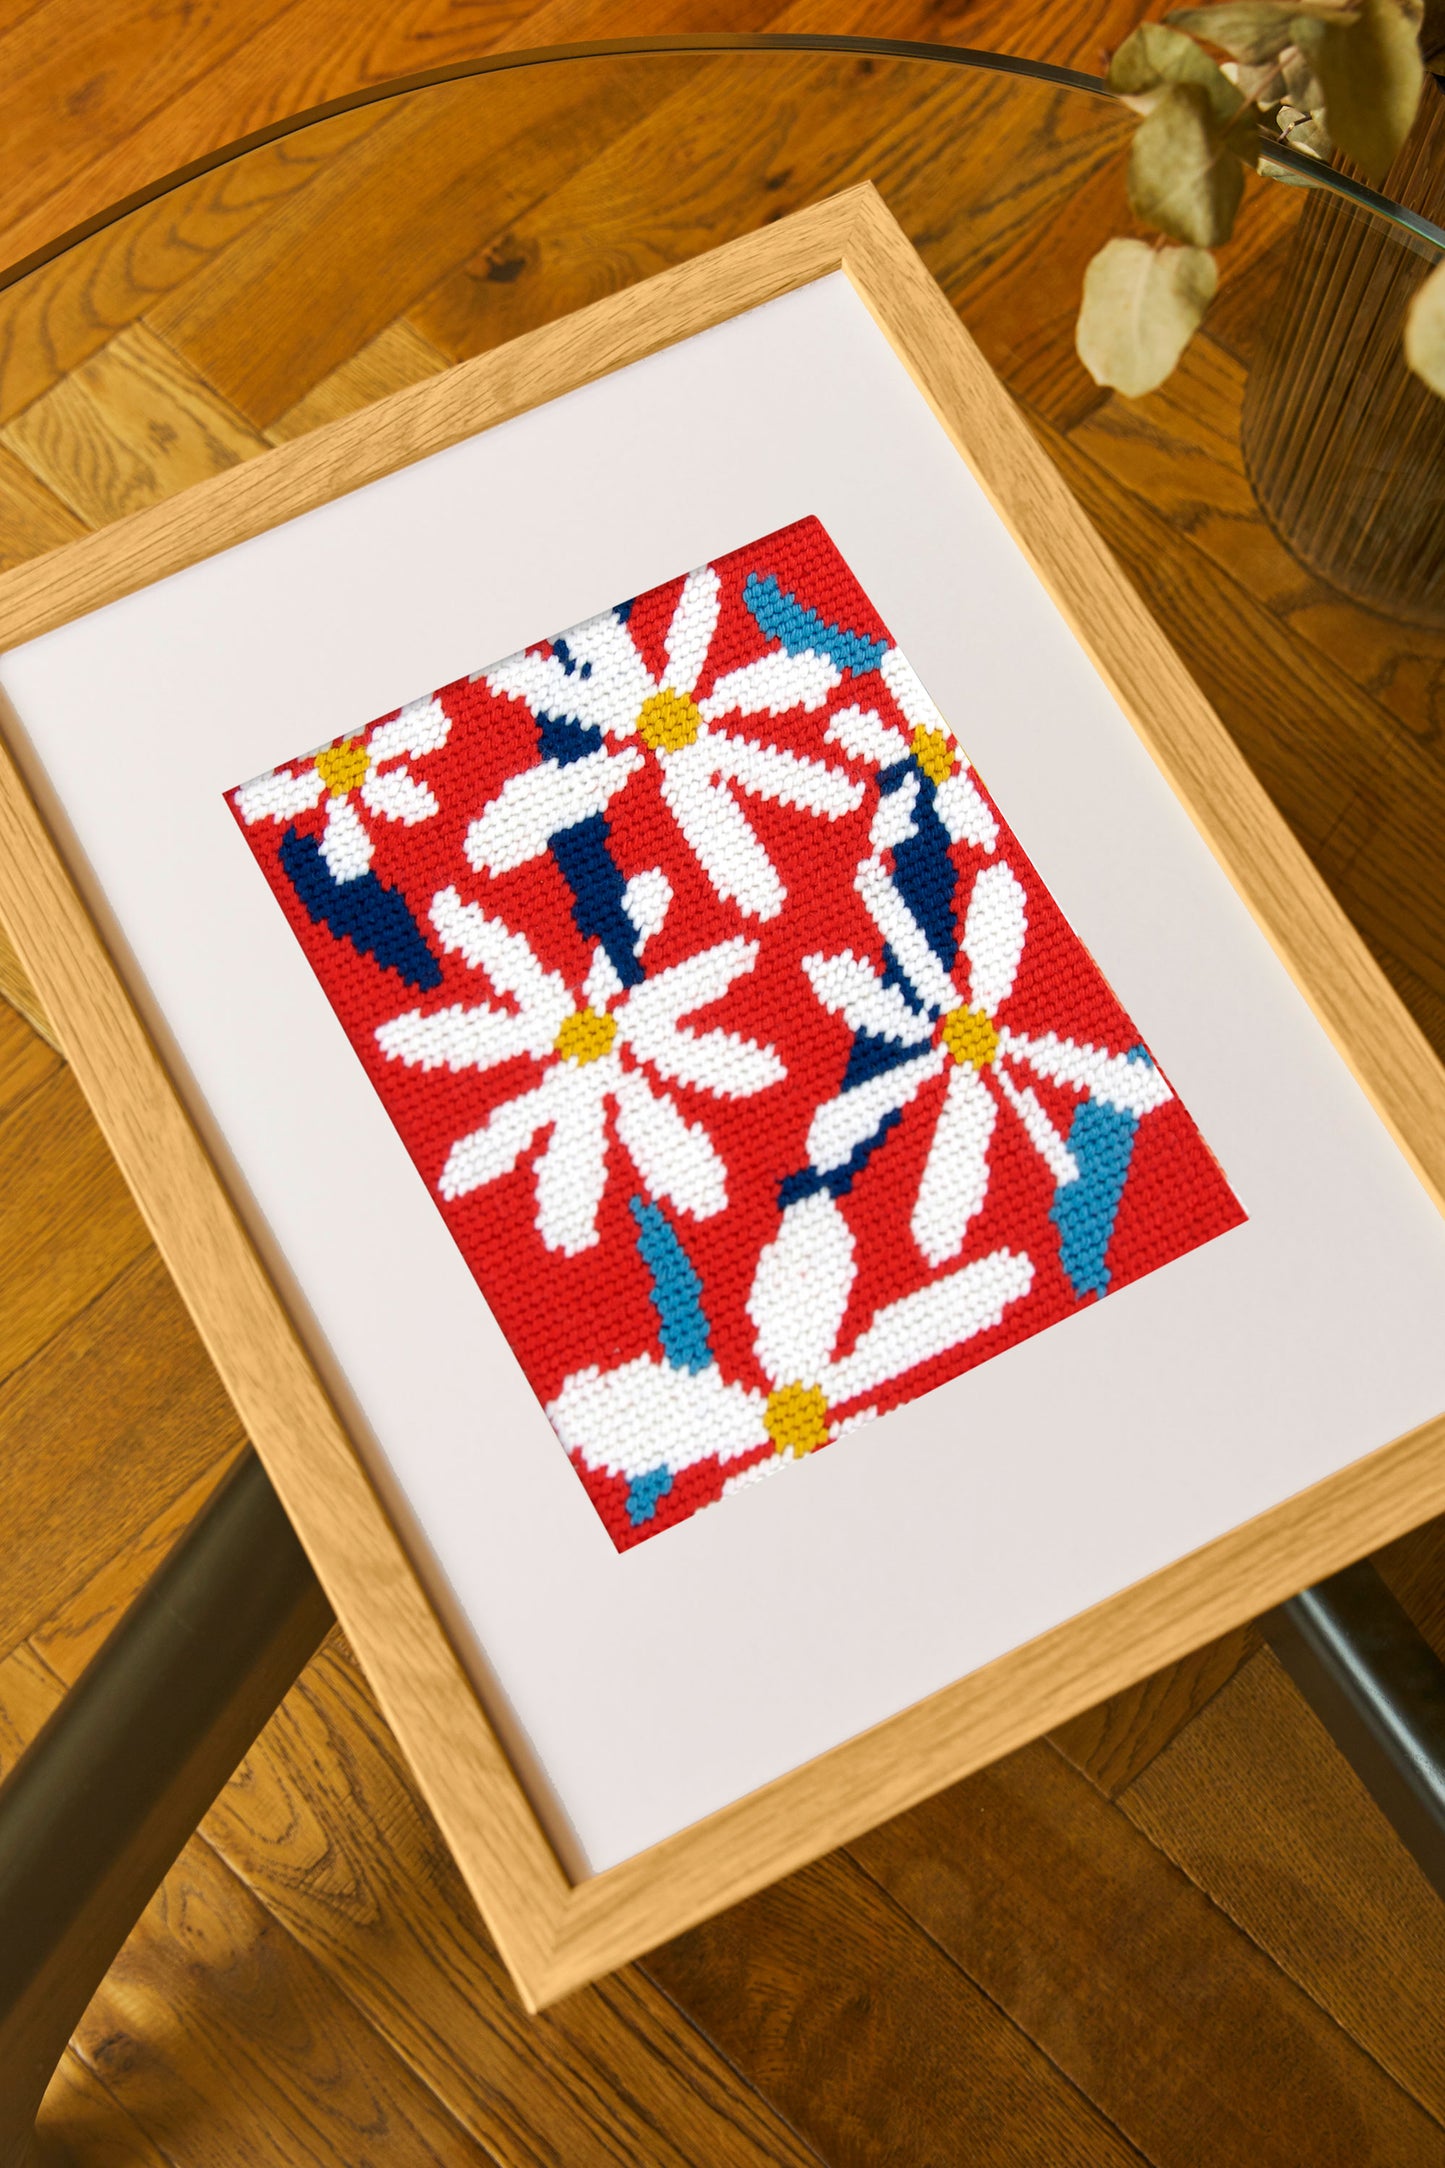 Tapestry Kit - ABSTRACT FLOWERS - By Bethan Haf Jones